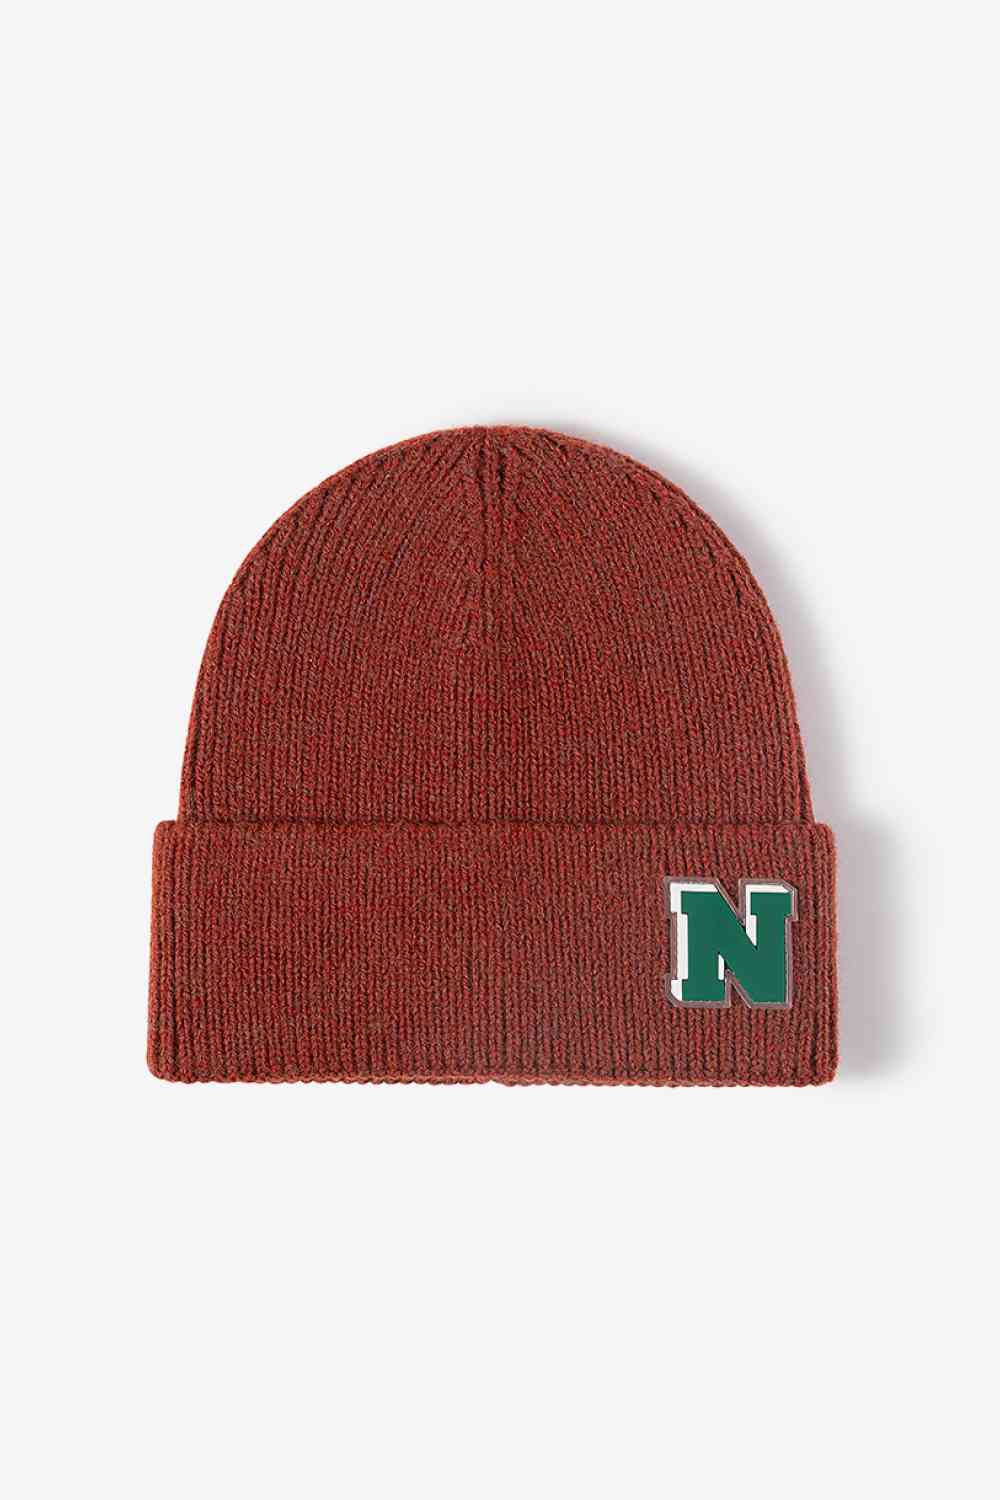 Letter N Patch Cuffed Knit Beanie Rust One Size